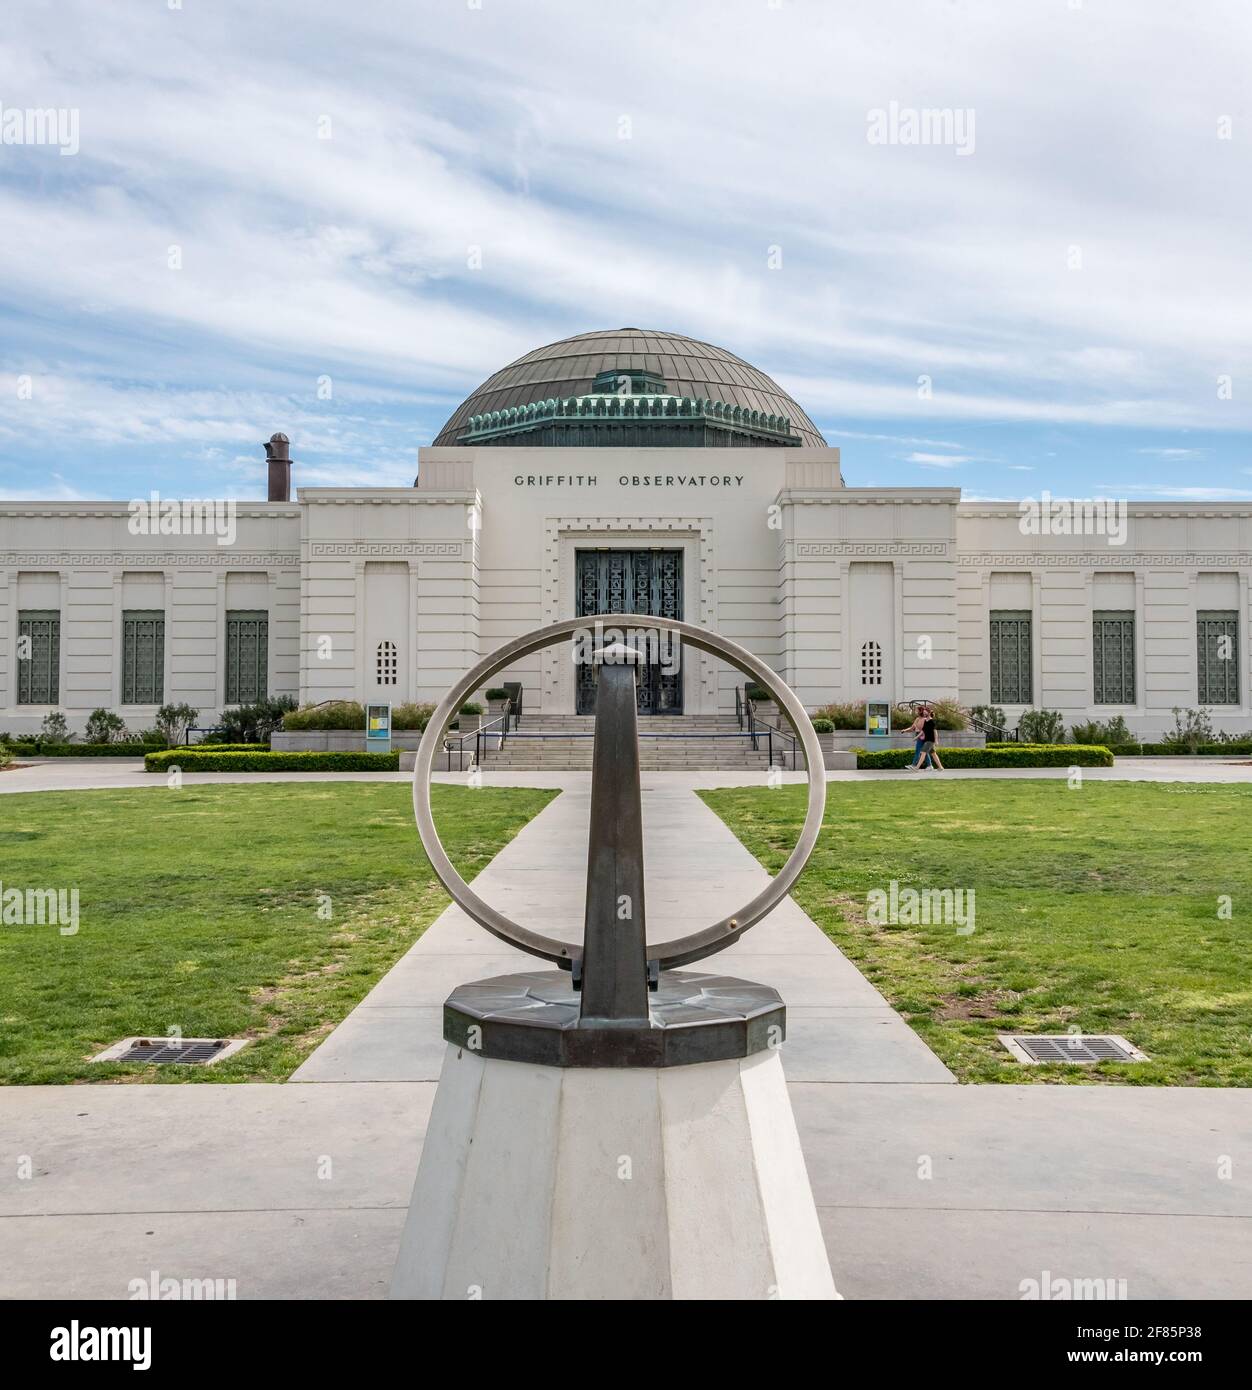 Front of Griffith Observatory with sun dial at center, no people on lawn or steps to historic building in Los Angeles. Stock Photo